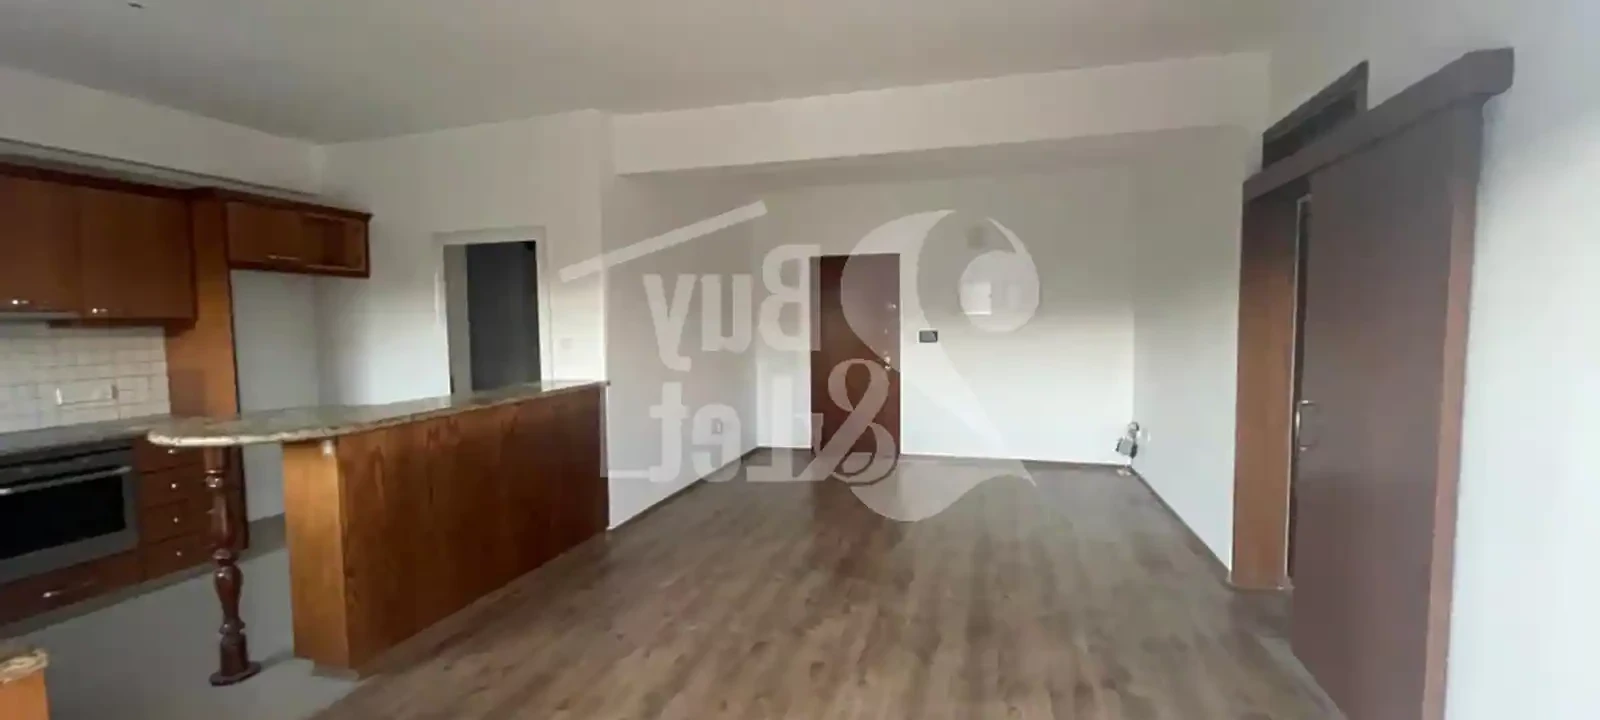 2-bedroom apartment fоr sаle €285.000, image 1